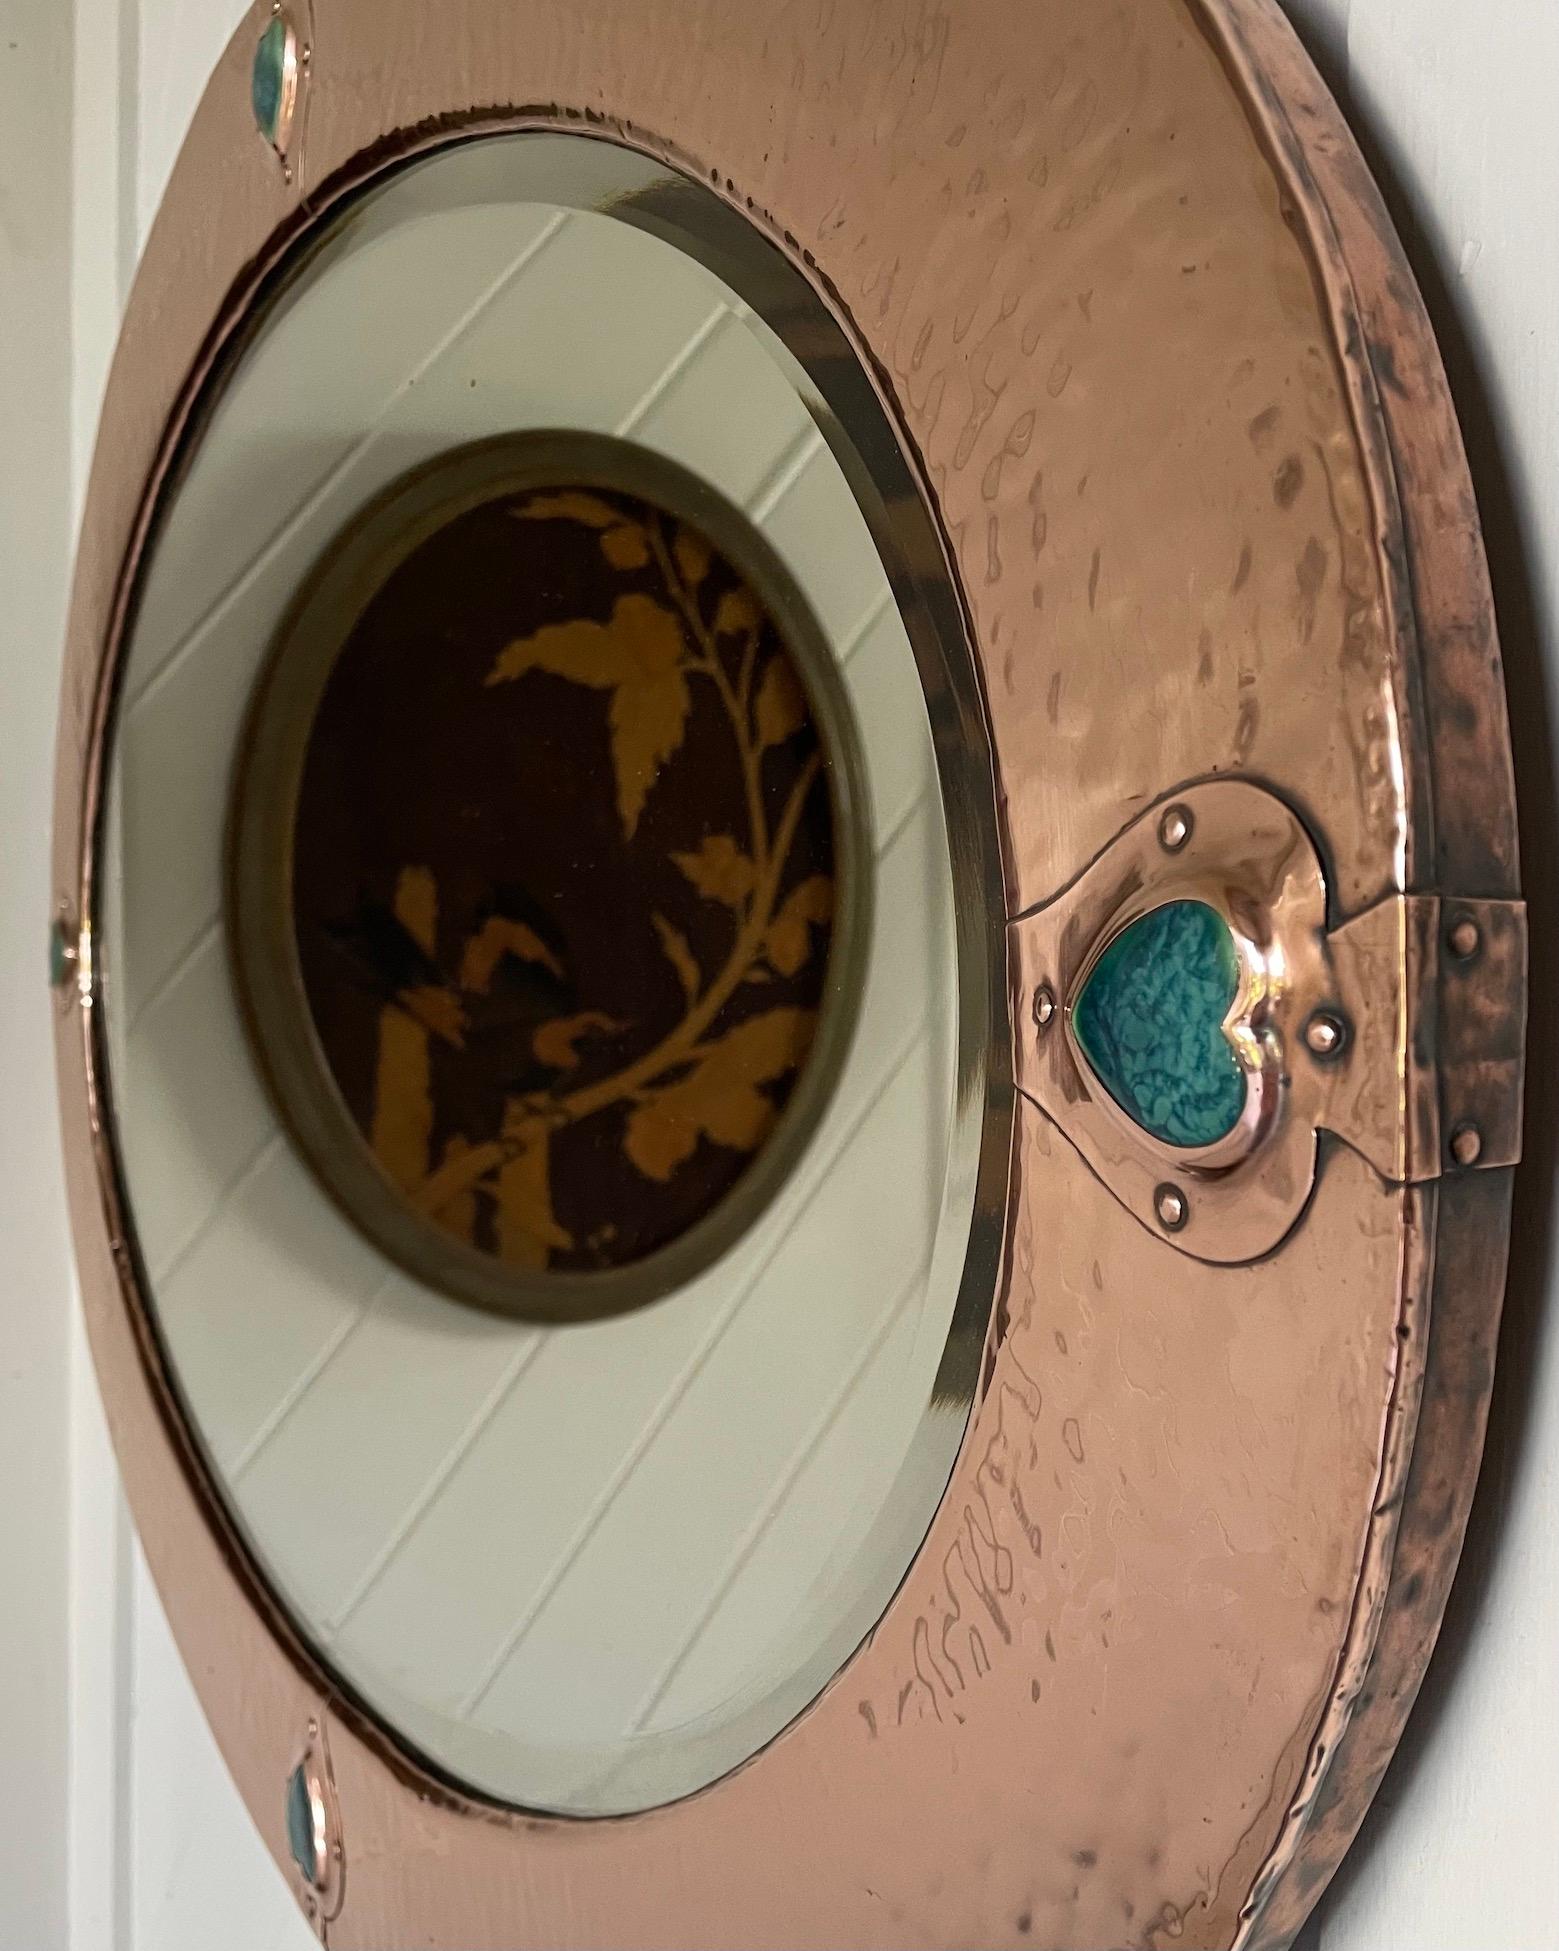 Arts & Crafts copper framed oval mirror
With inset cabochon heart shaped Ruskin panels
Attributed to Liberty & Co
Circa 1900